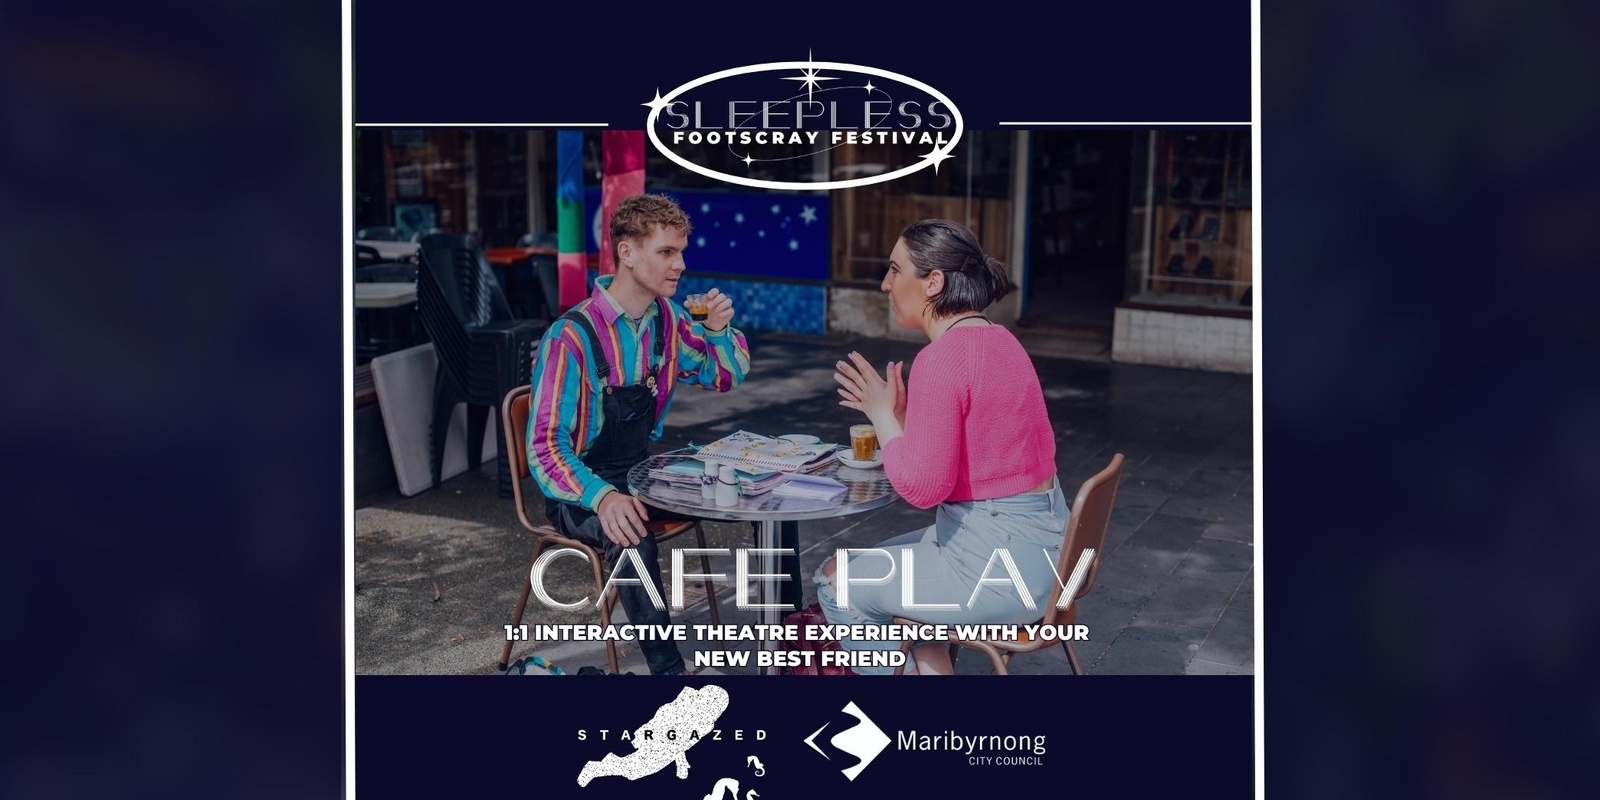 Banner image for Sleepless Footscray Festival: Cafe Play